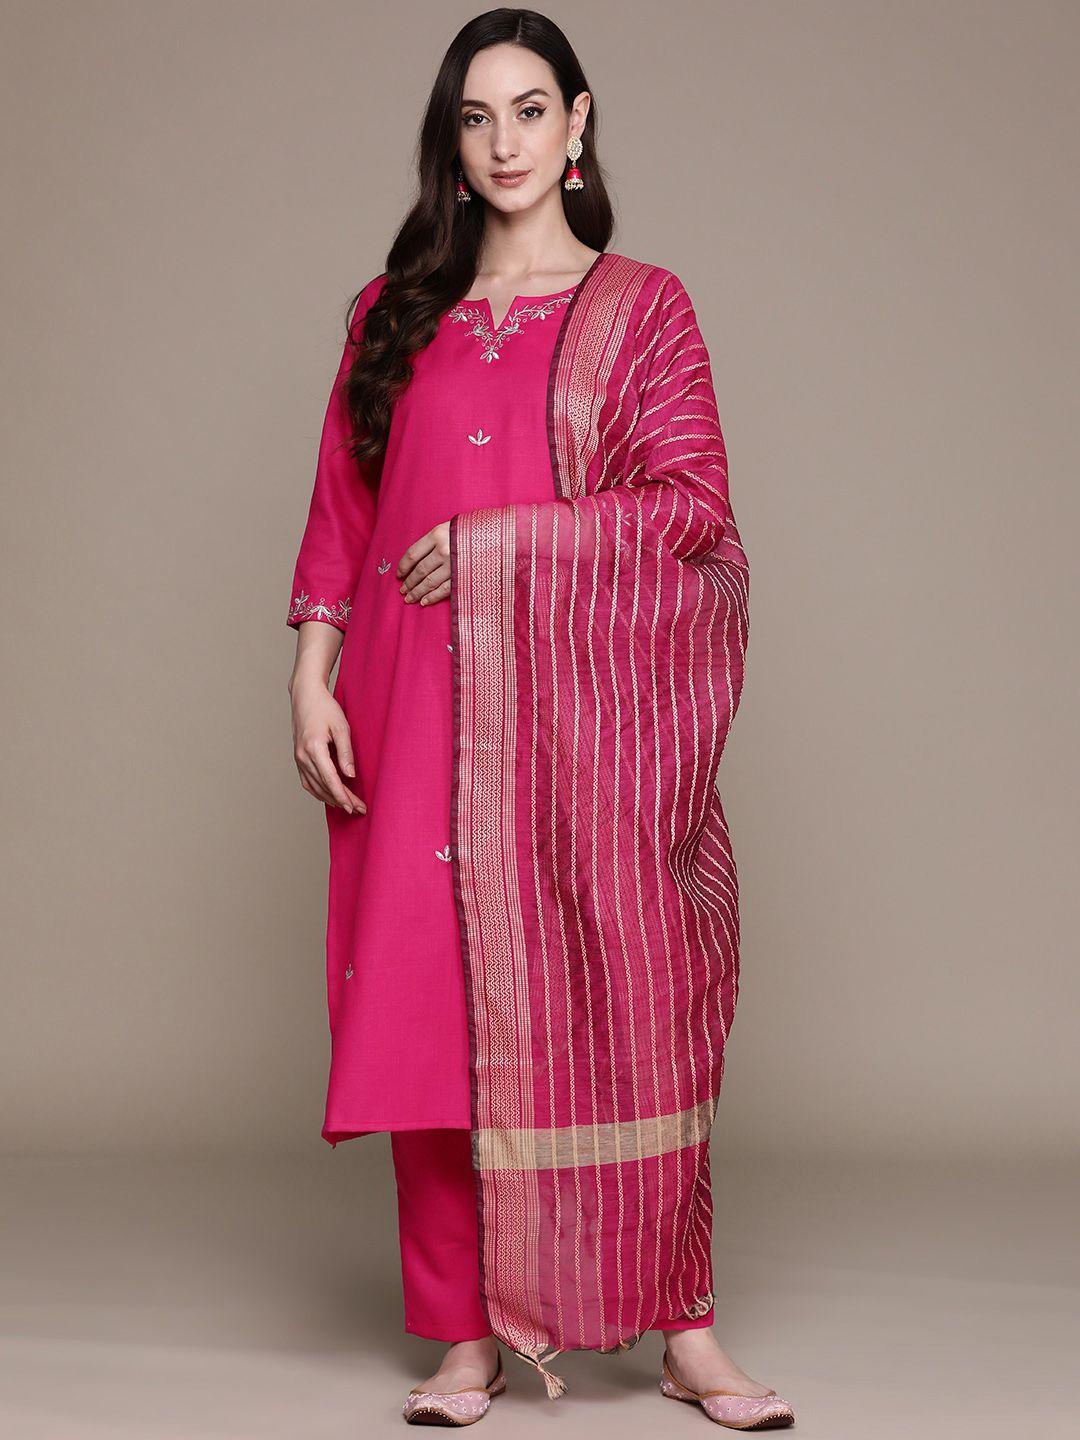 anubhutee floral embroidered regular thread work kurta with trousers & with dupatta